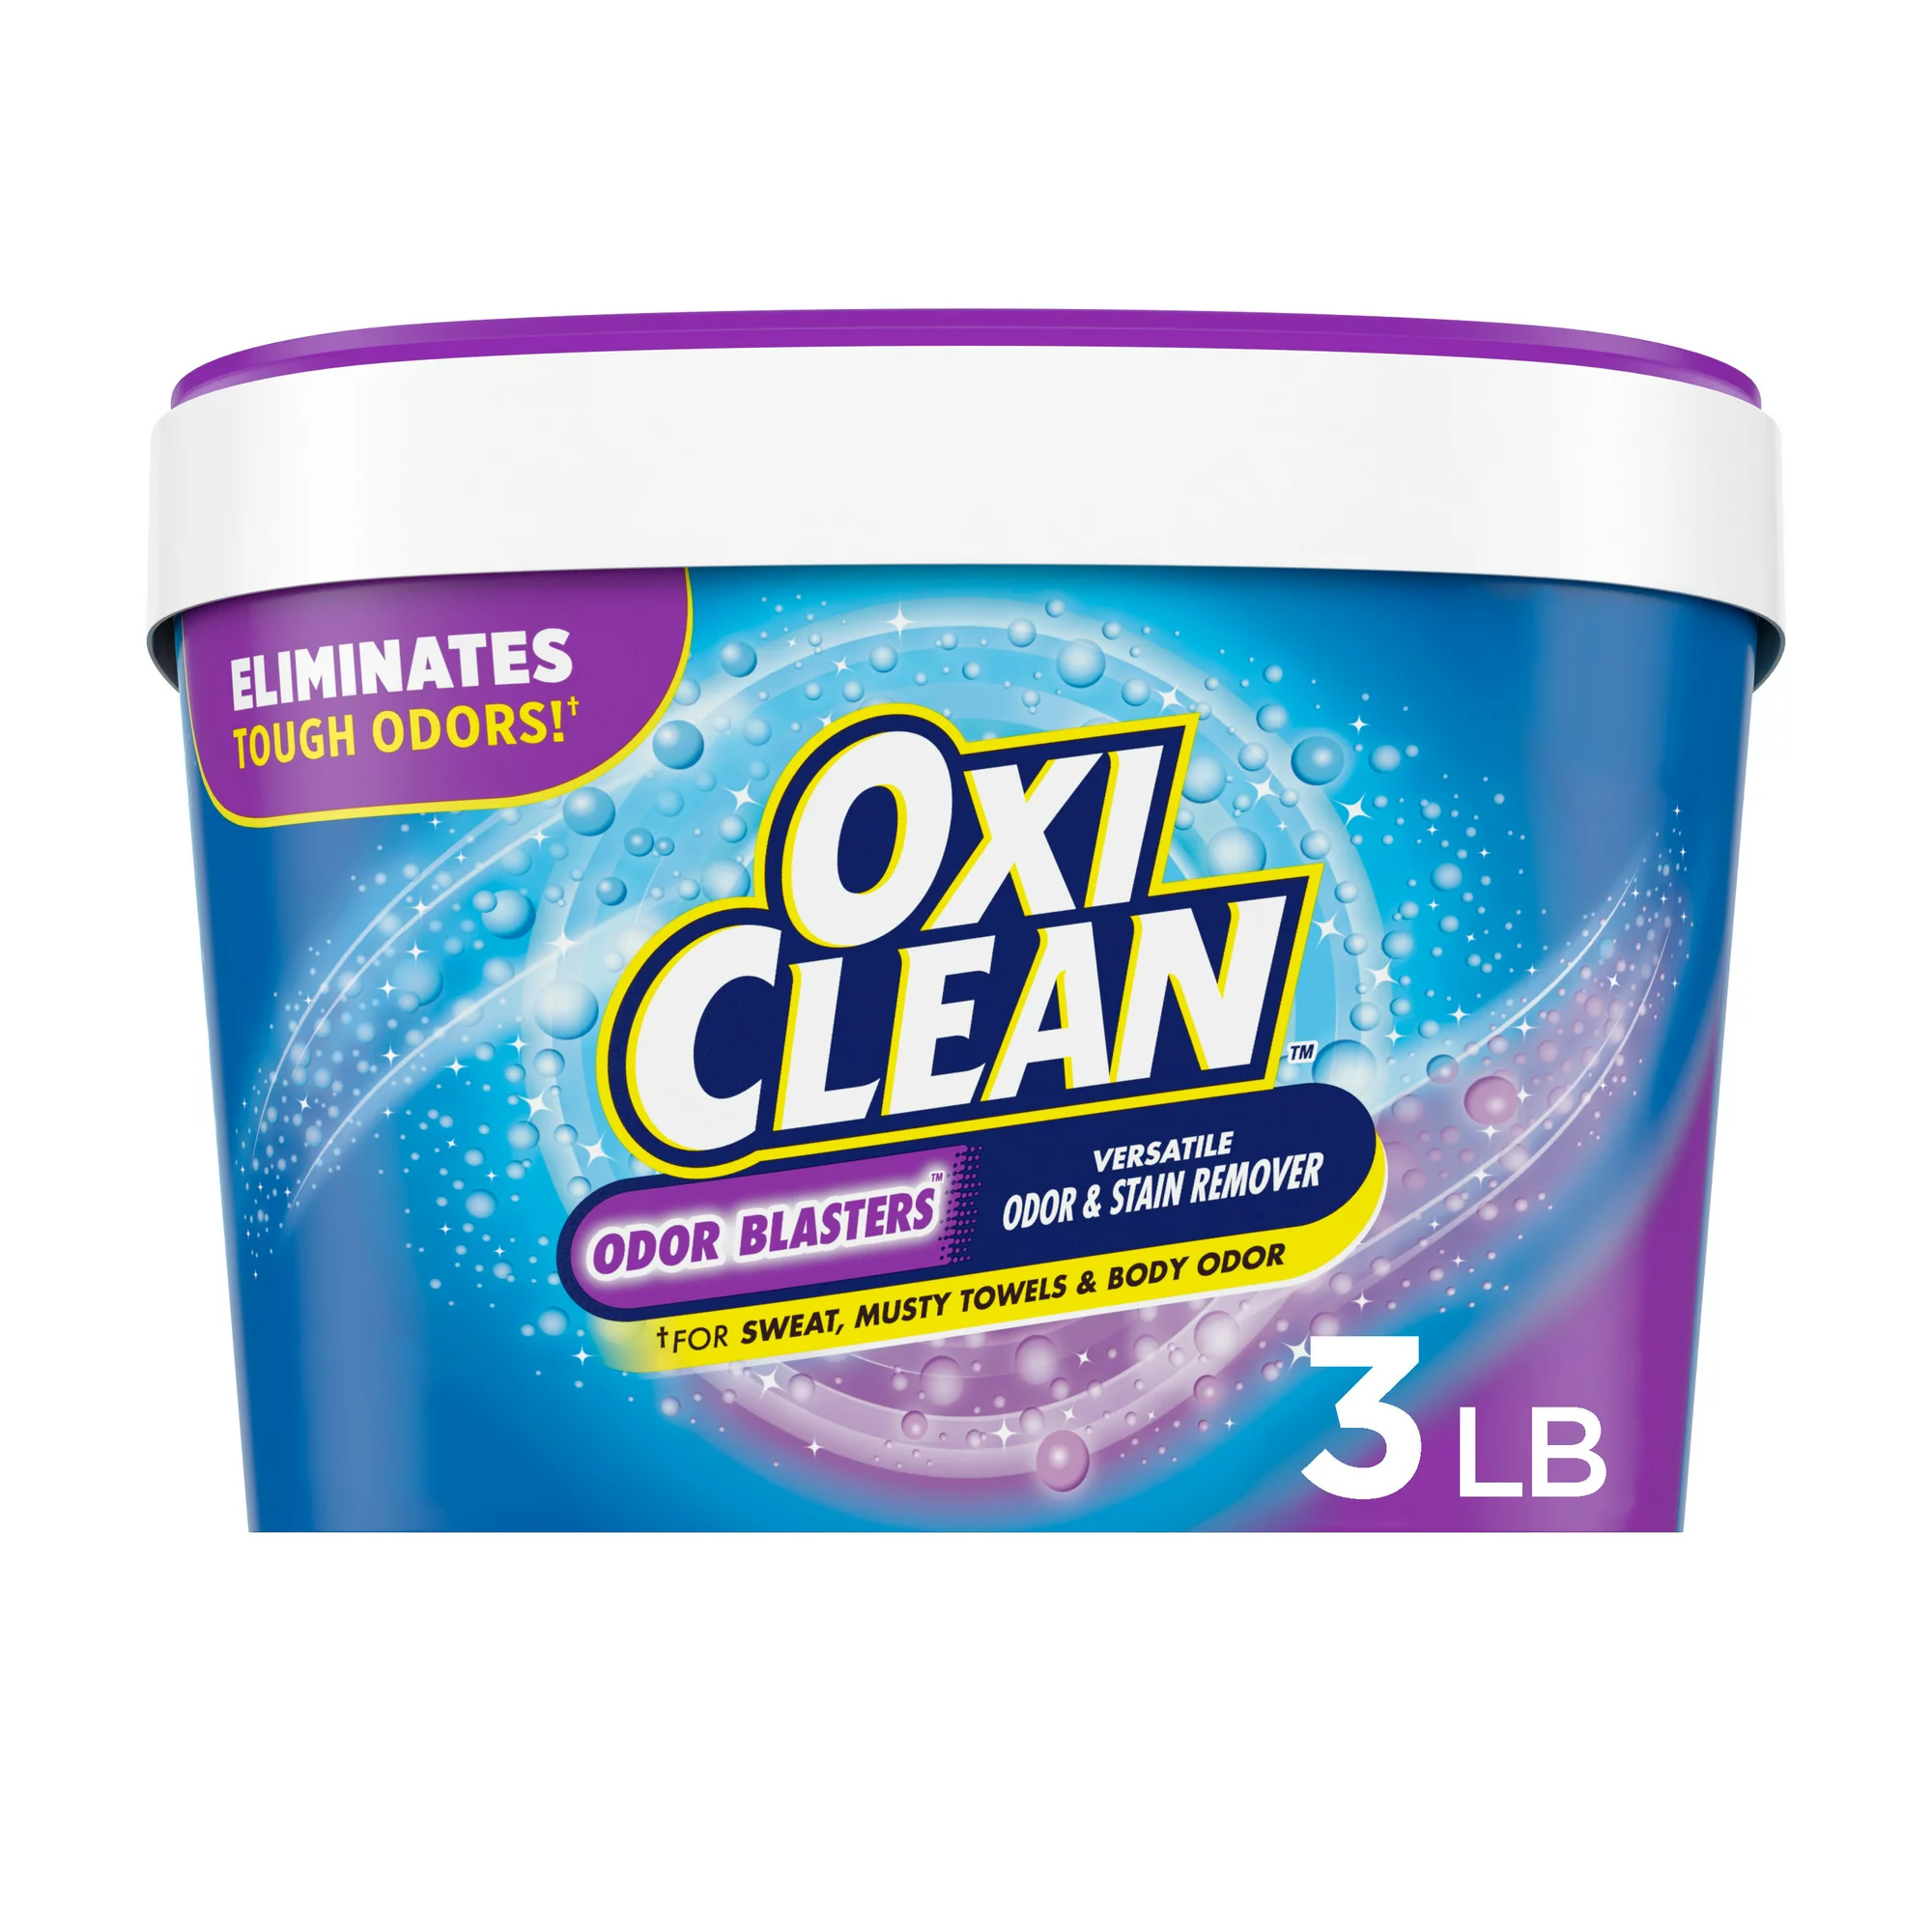 OxiClean Odor Blasters Versatile Odor and Stain Remover Powder 3 lb 0fca1682 aa3d 4ce2 a8c6 916c3c5a29f0.4e110820addfb3711ab1dbf5d02ff3d6